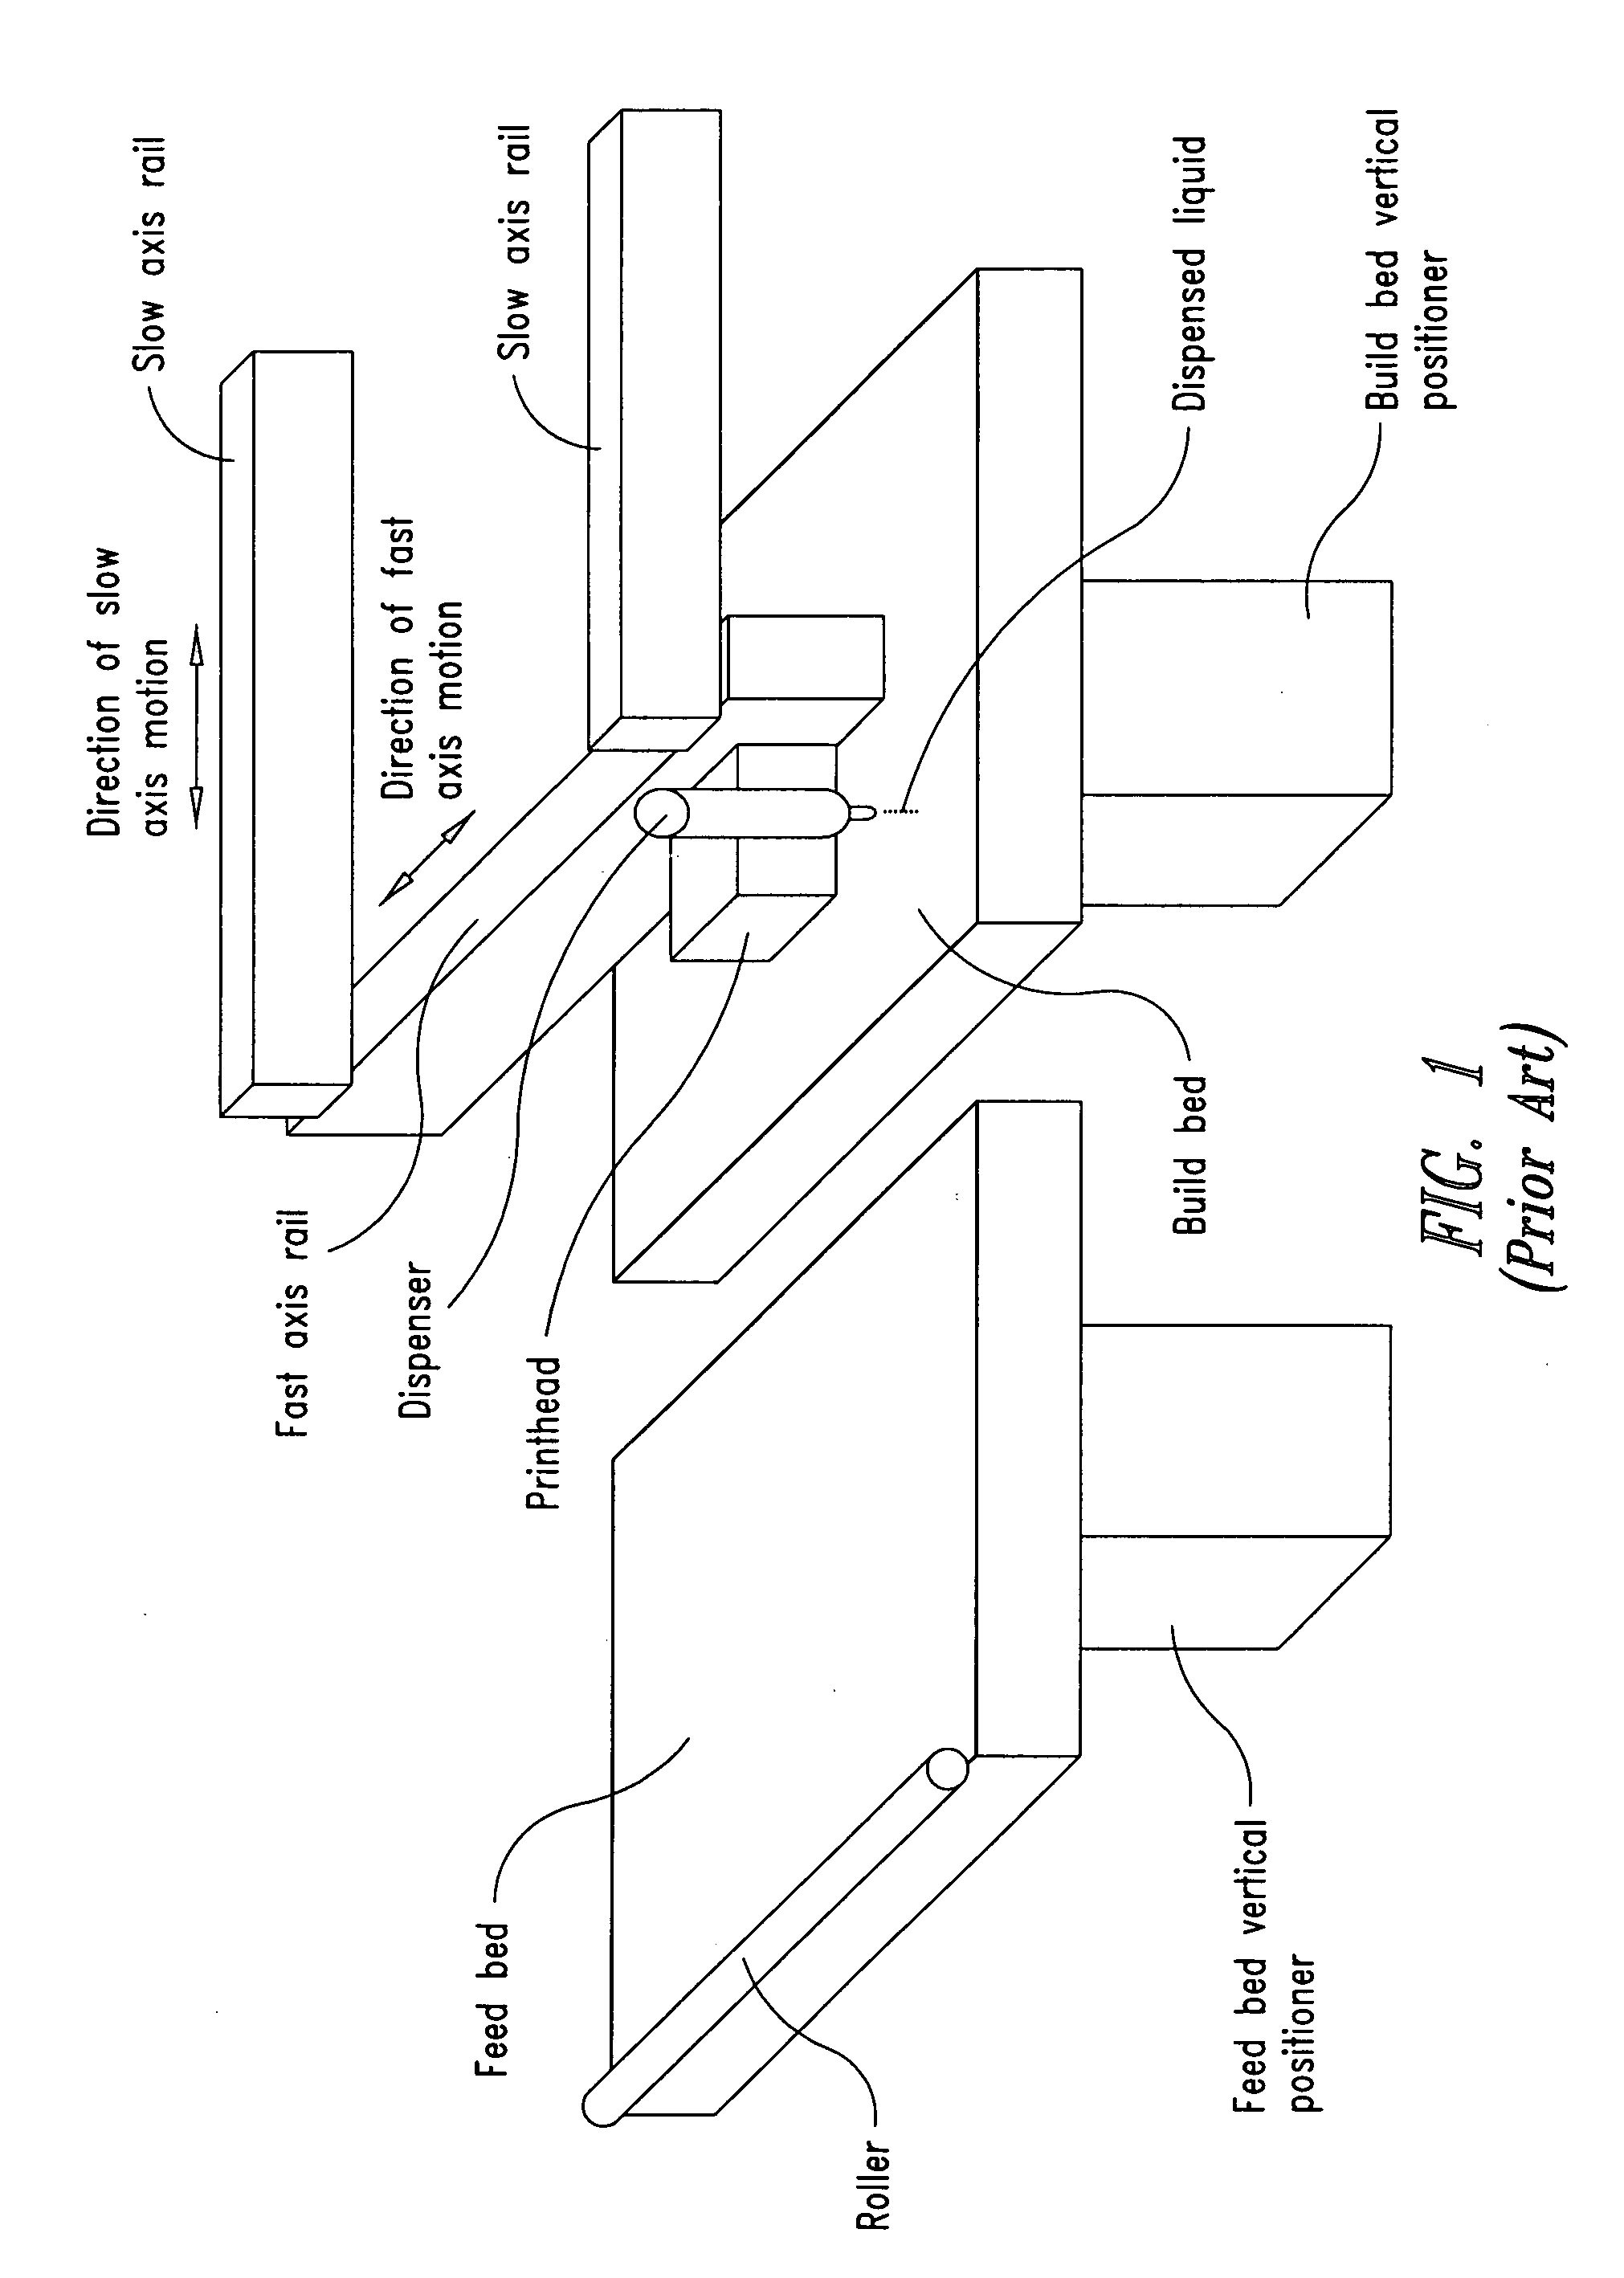 Three-dimensional printing apparatus and methods of manufacture including sterilization or disinfection, for example, using ultraviolet light